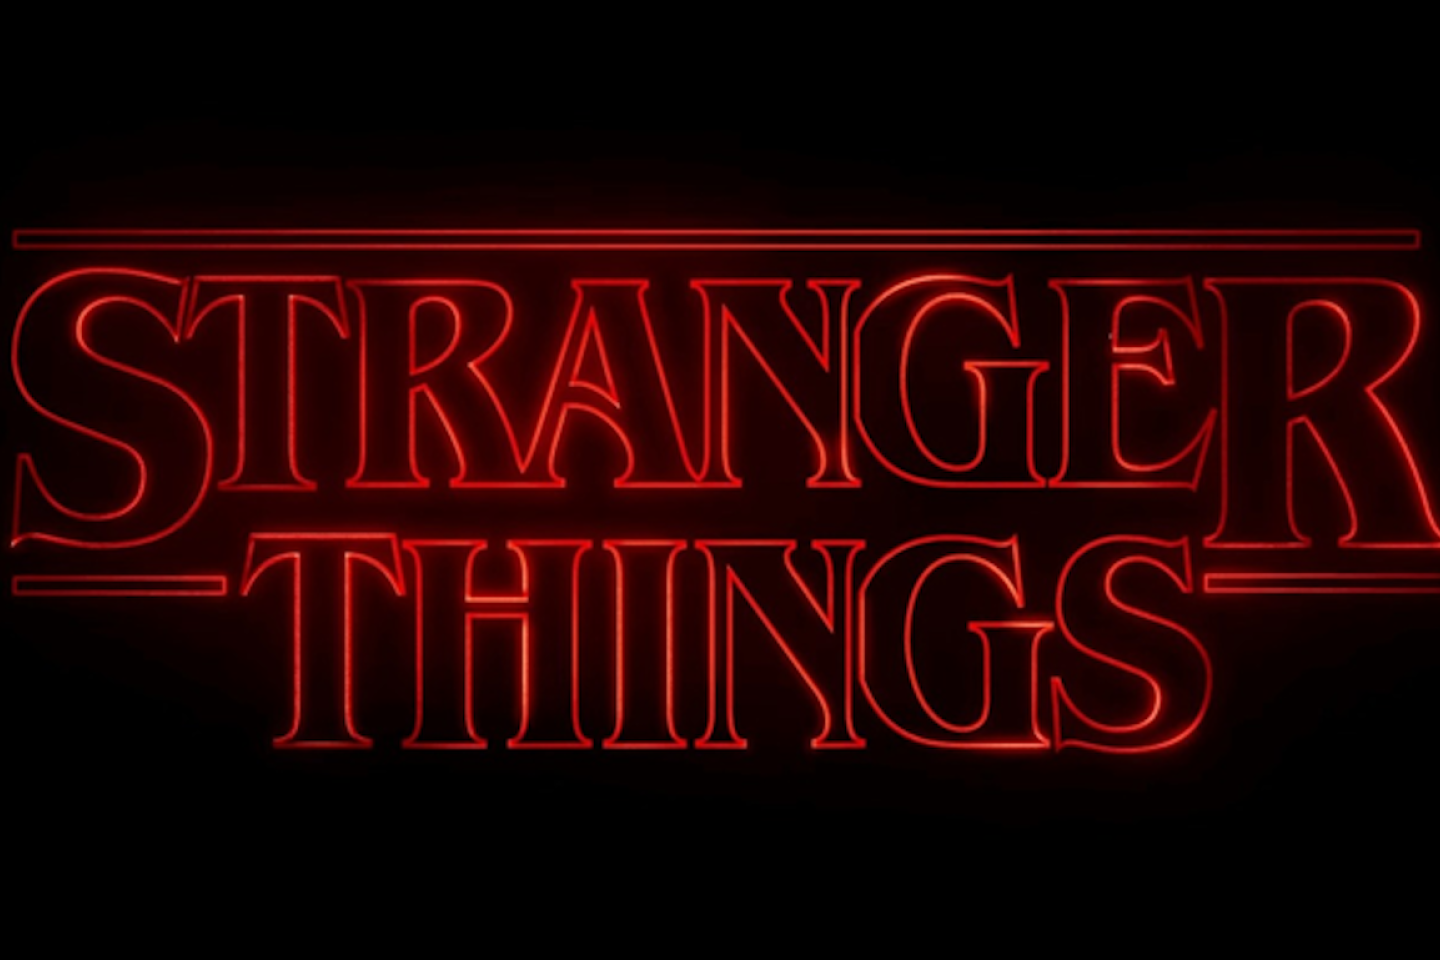 Stranger Things & the faboulous eighties